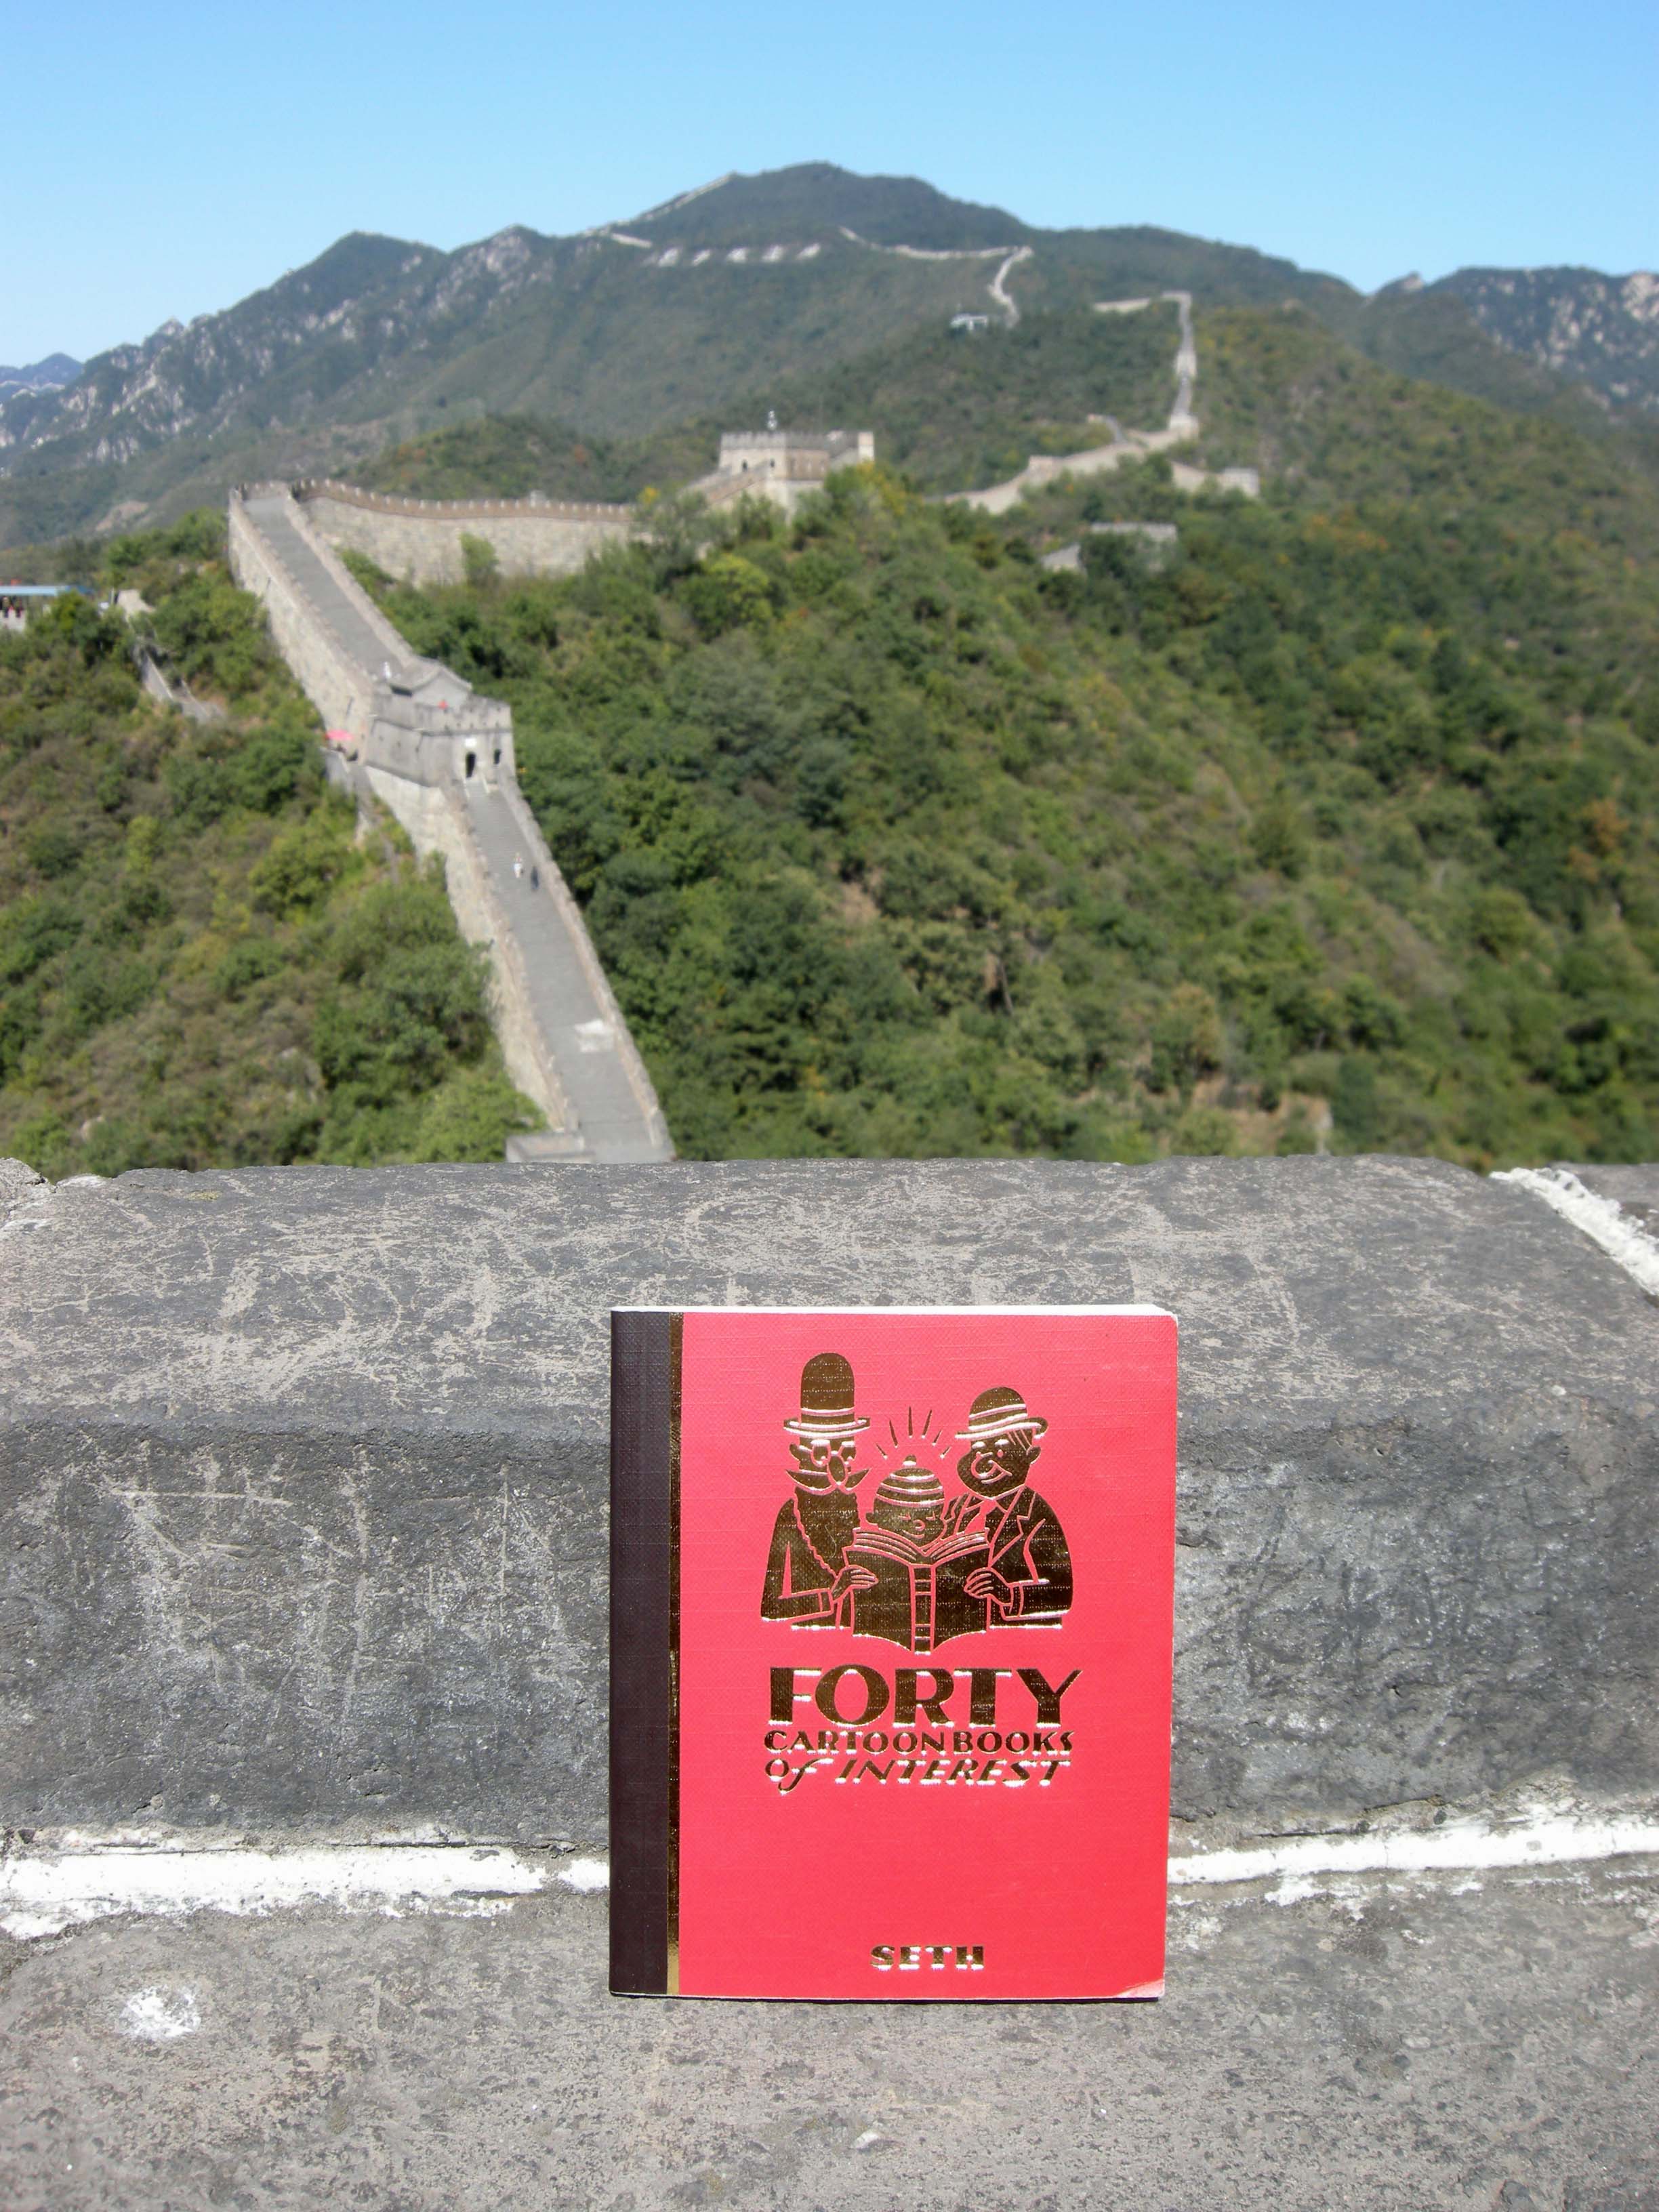 Forty Cartoon Books of Interest visits the Great Wall (21 Sept 2009)